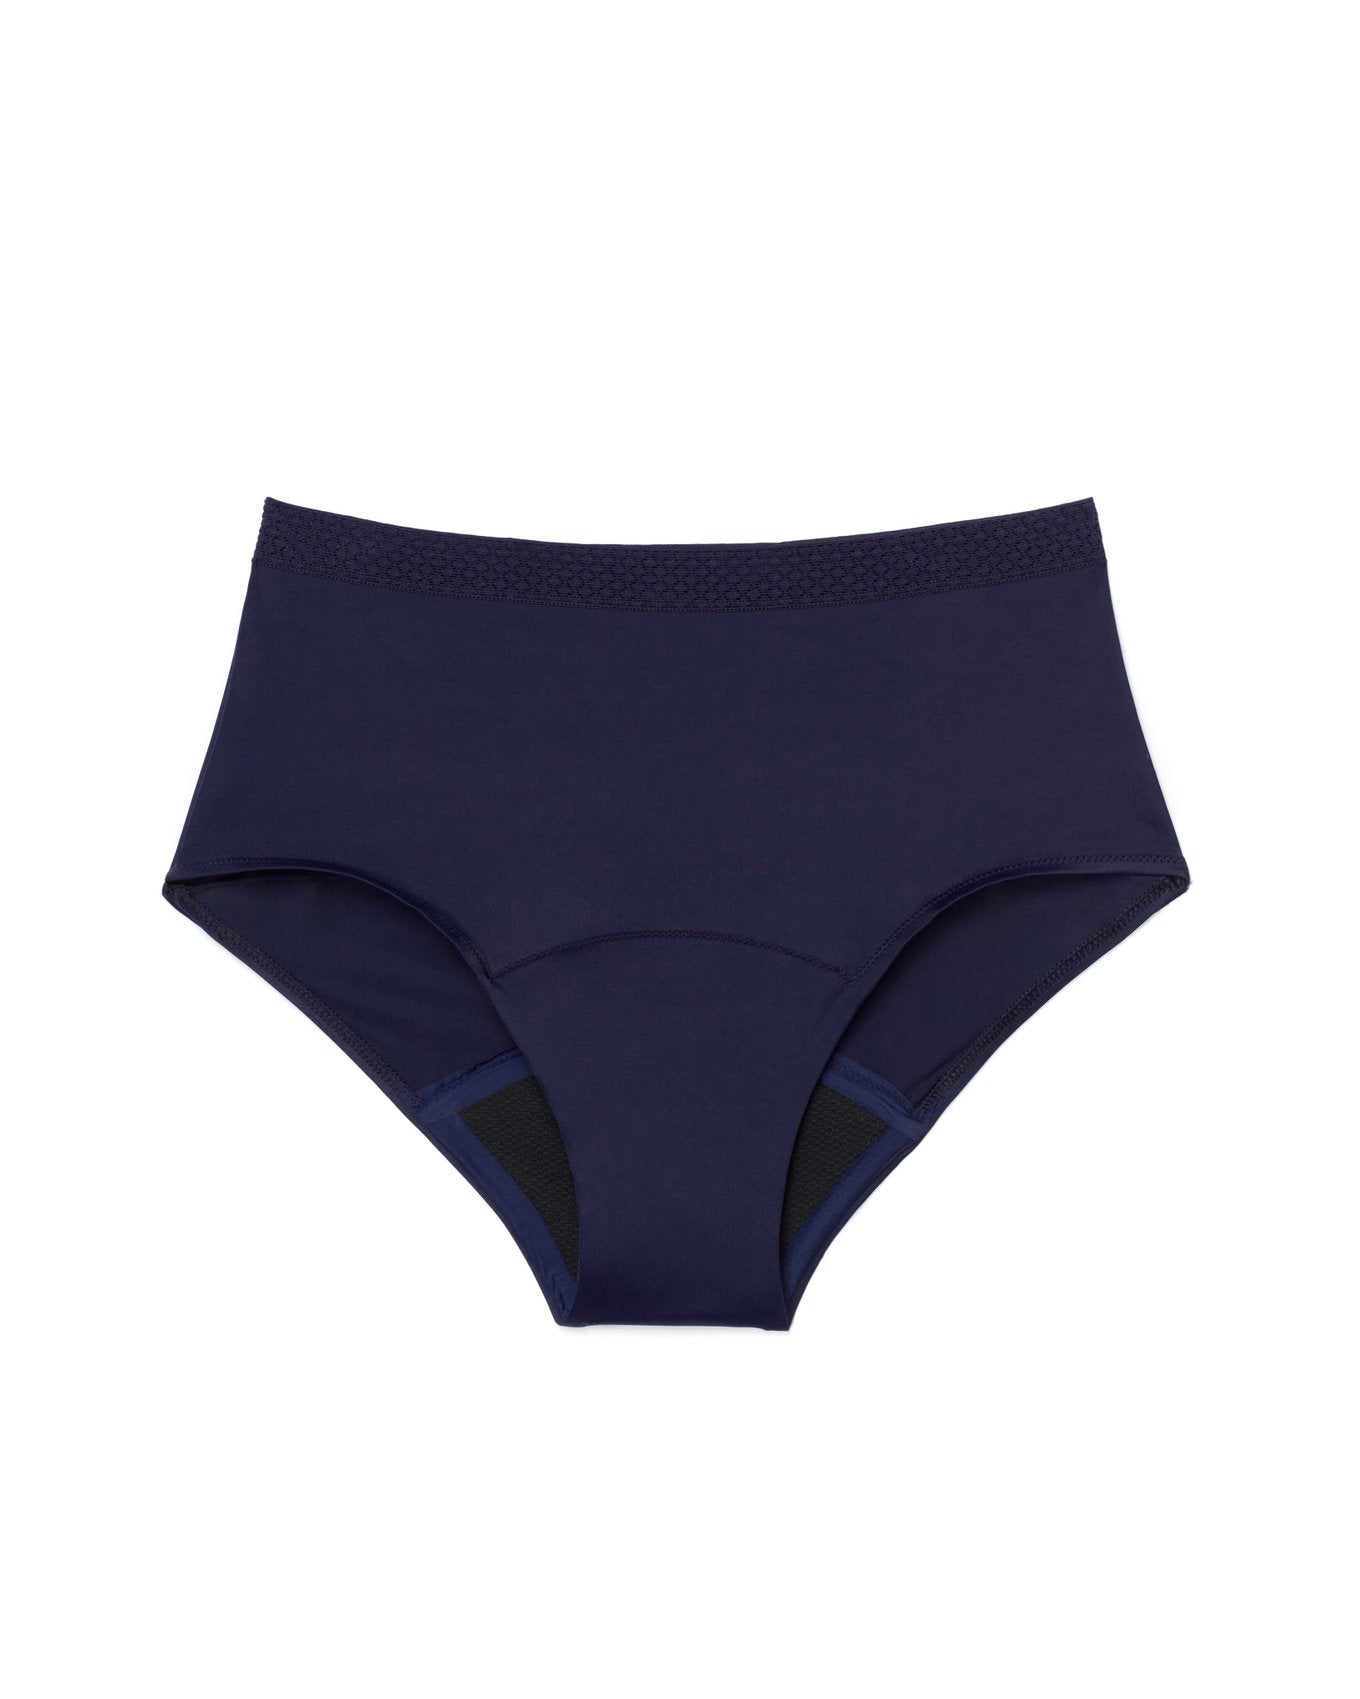 Joyja Jess period-proof panty in color Evening Blue and shape high waisted